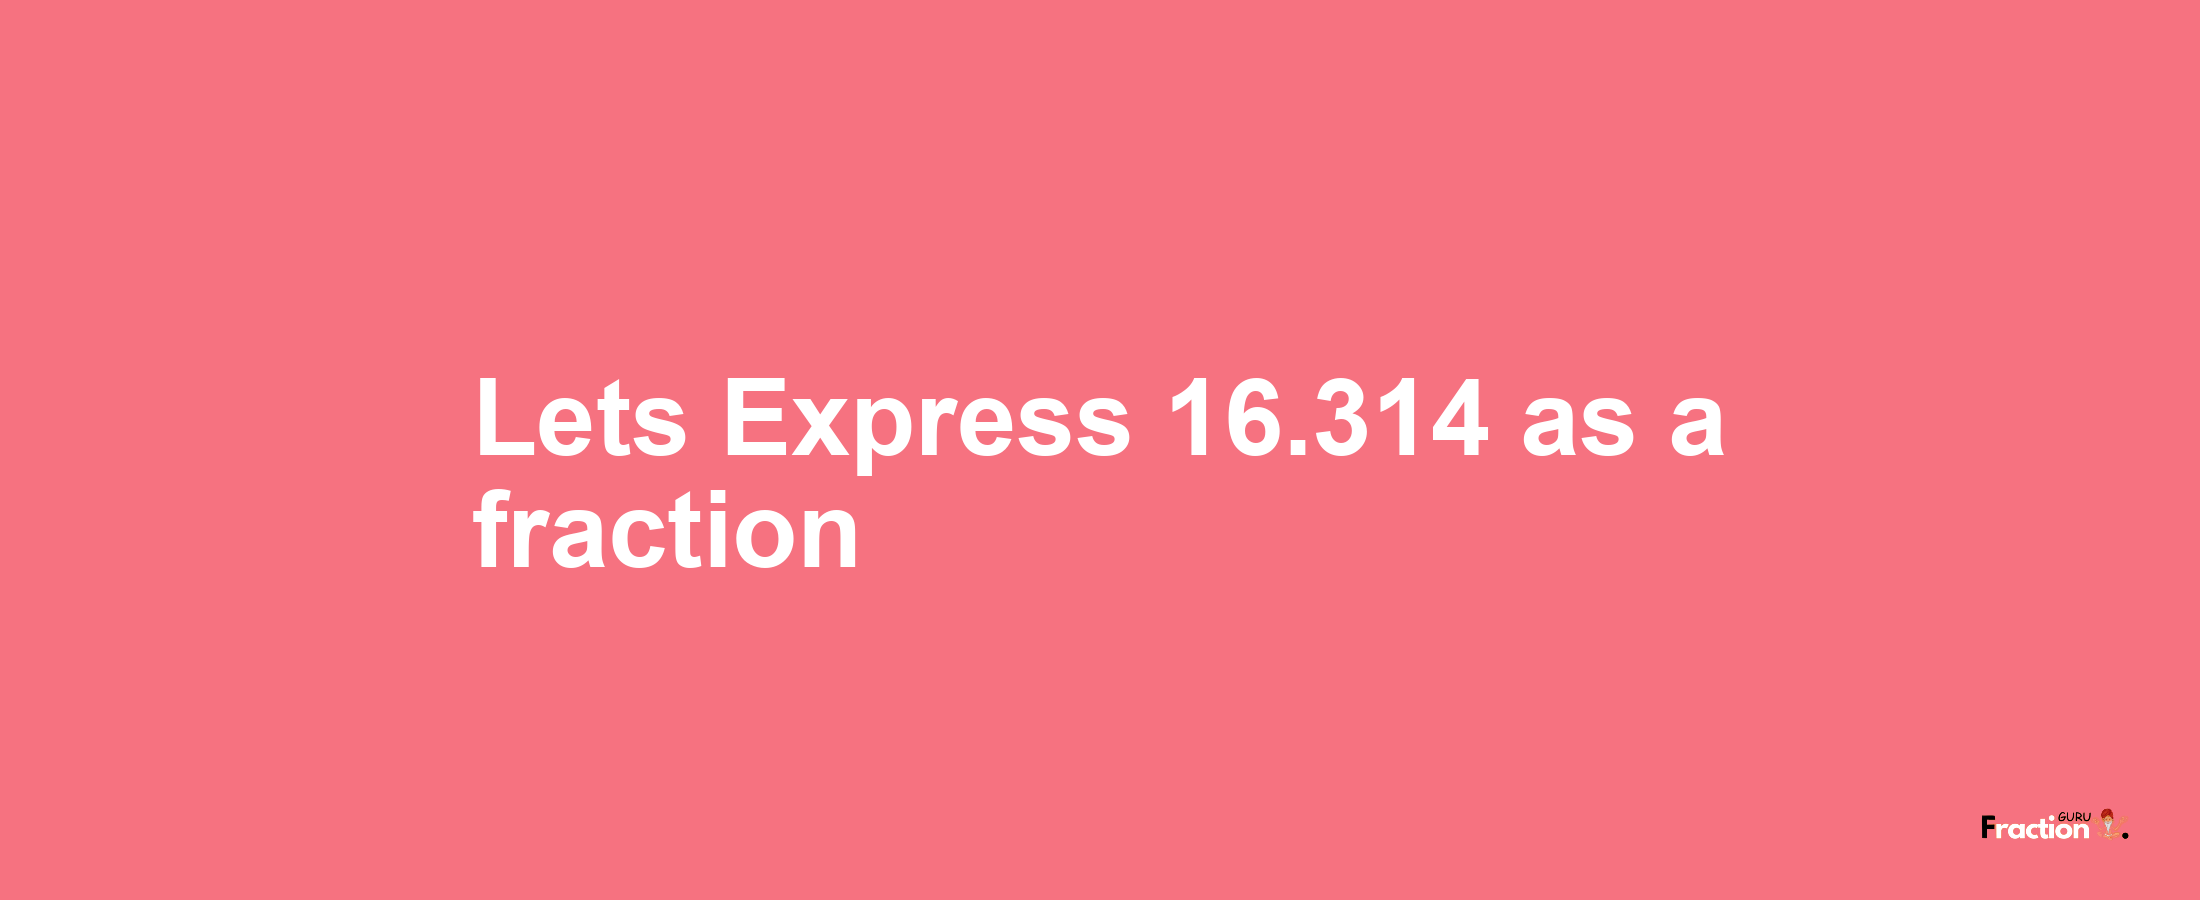 Lets Express 16.314 as afraction